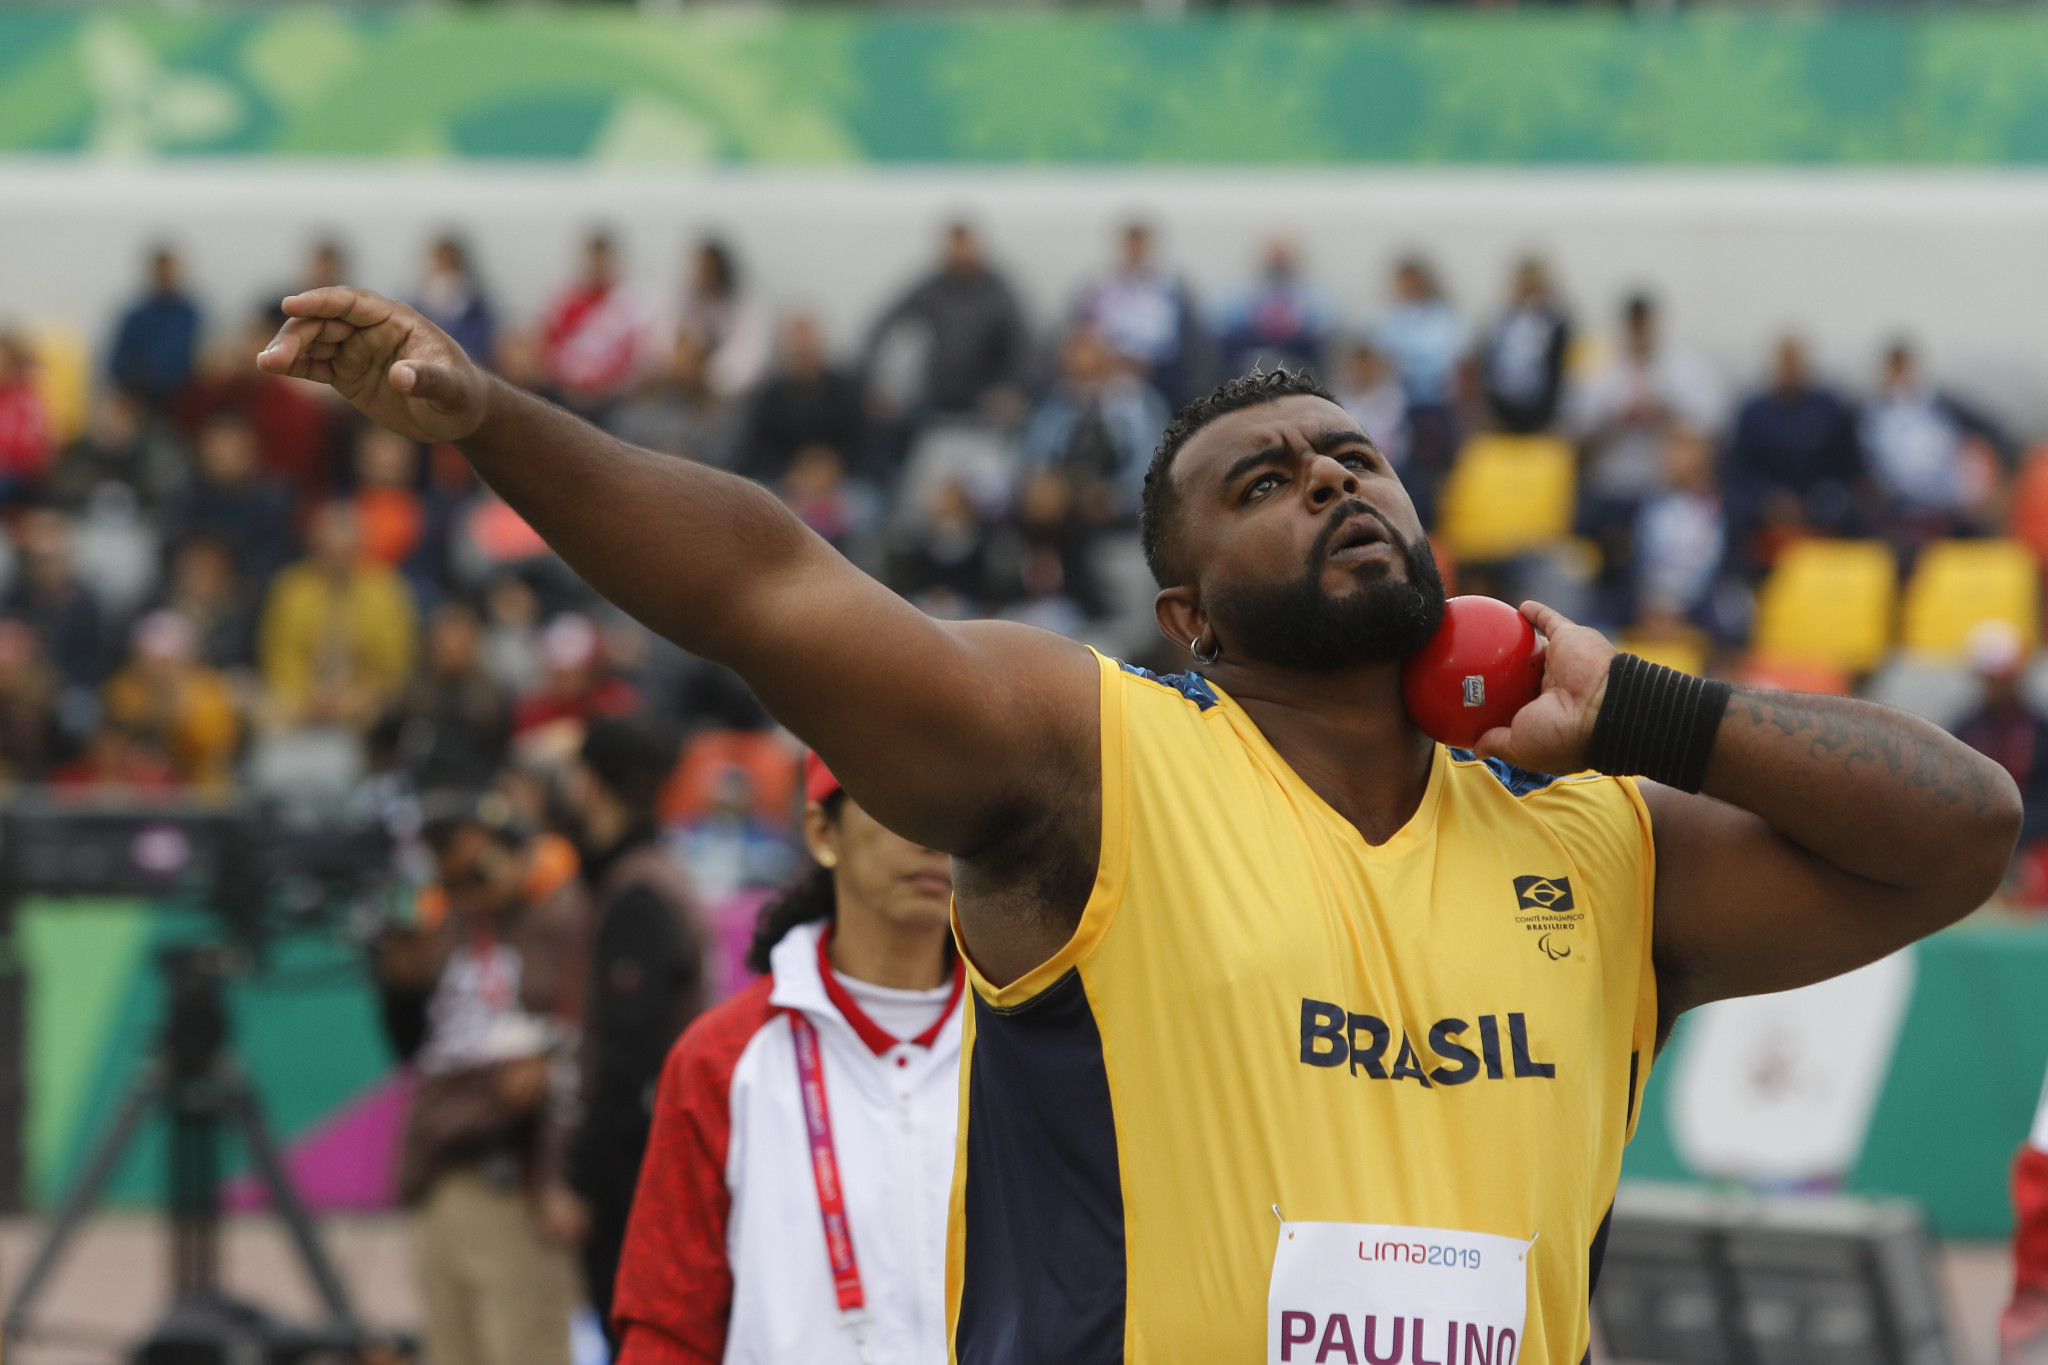 Brazil dominate in athletics at Lima 2019 Parapan American Games